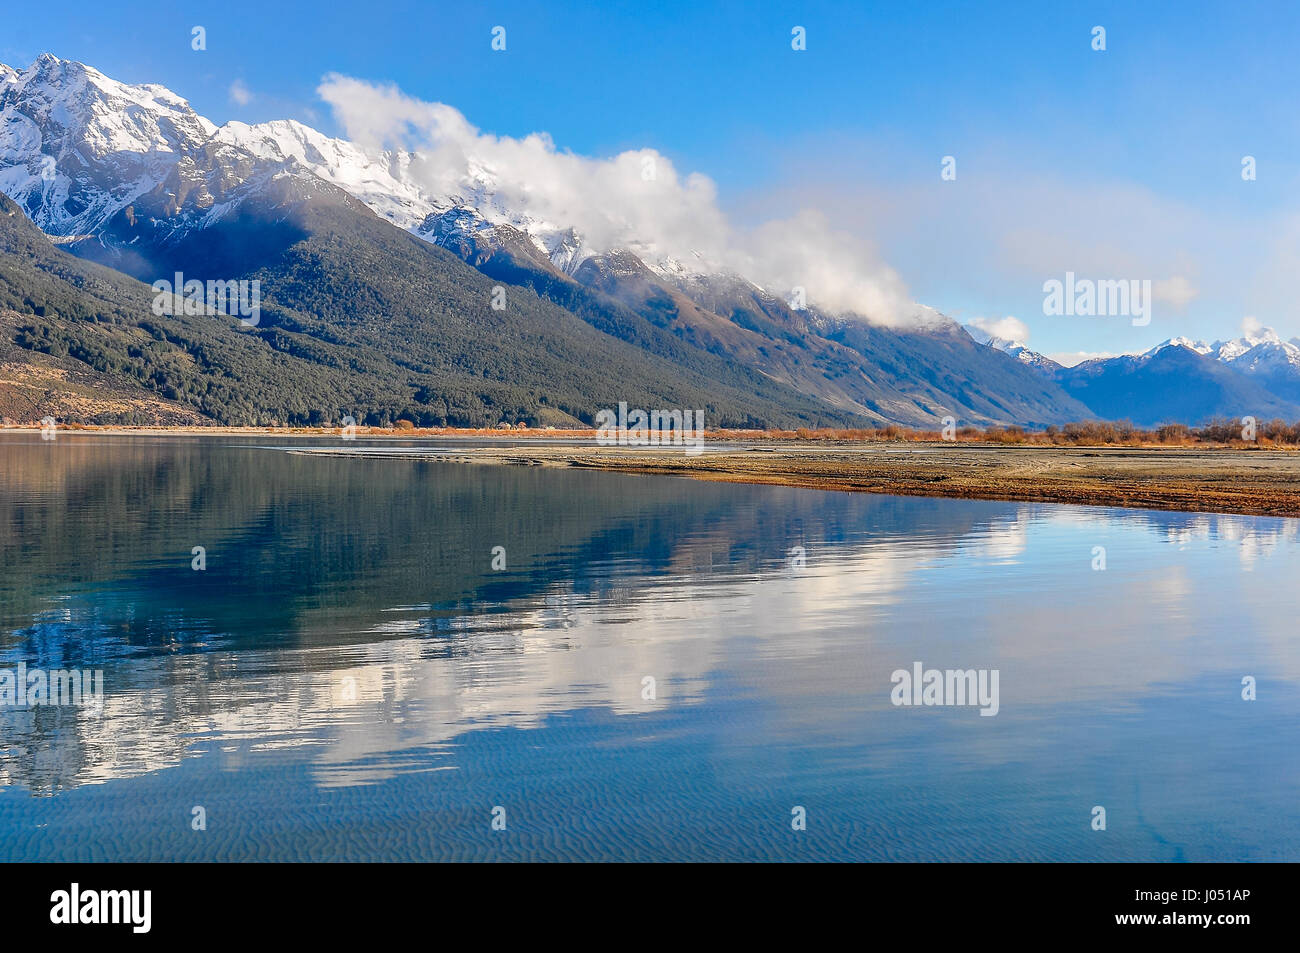 Reflection of the mountains in Lord of the Rings film location, Glenorchy, New Zealand Stock Photo